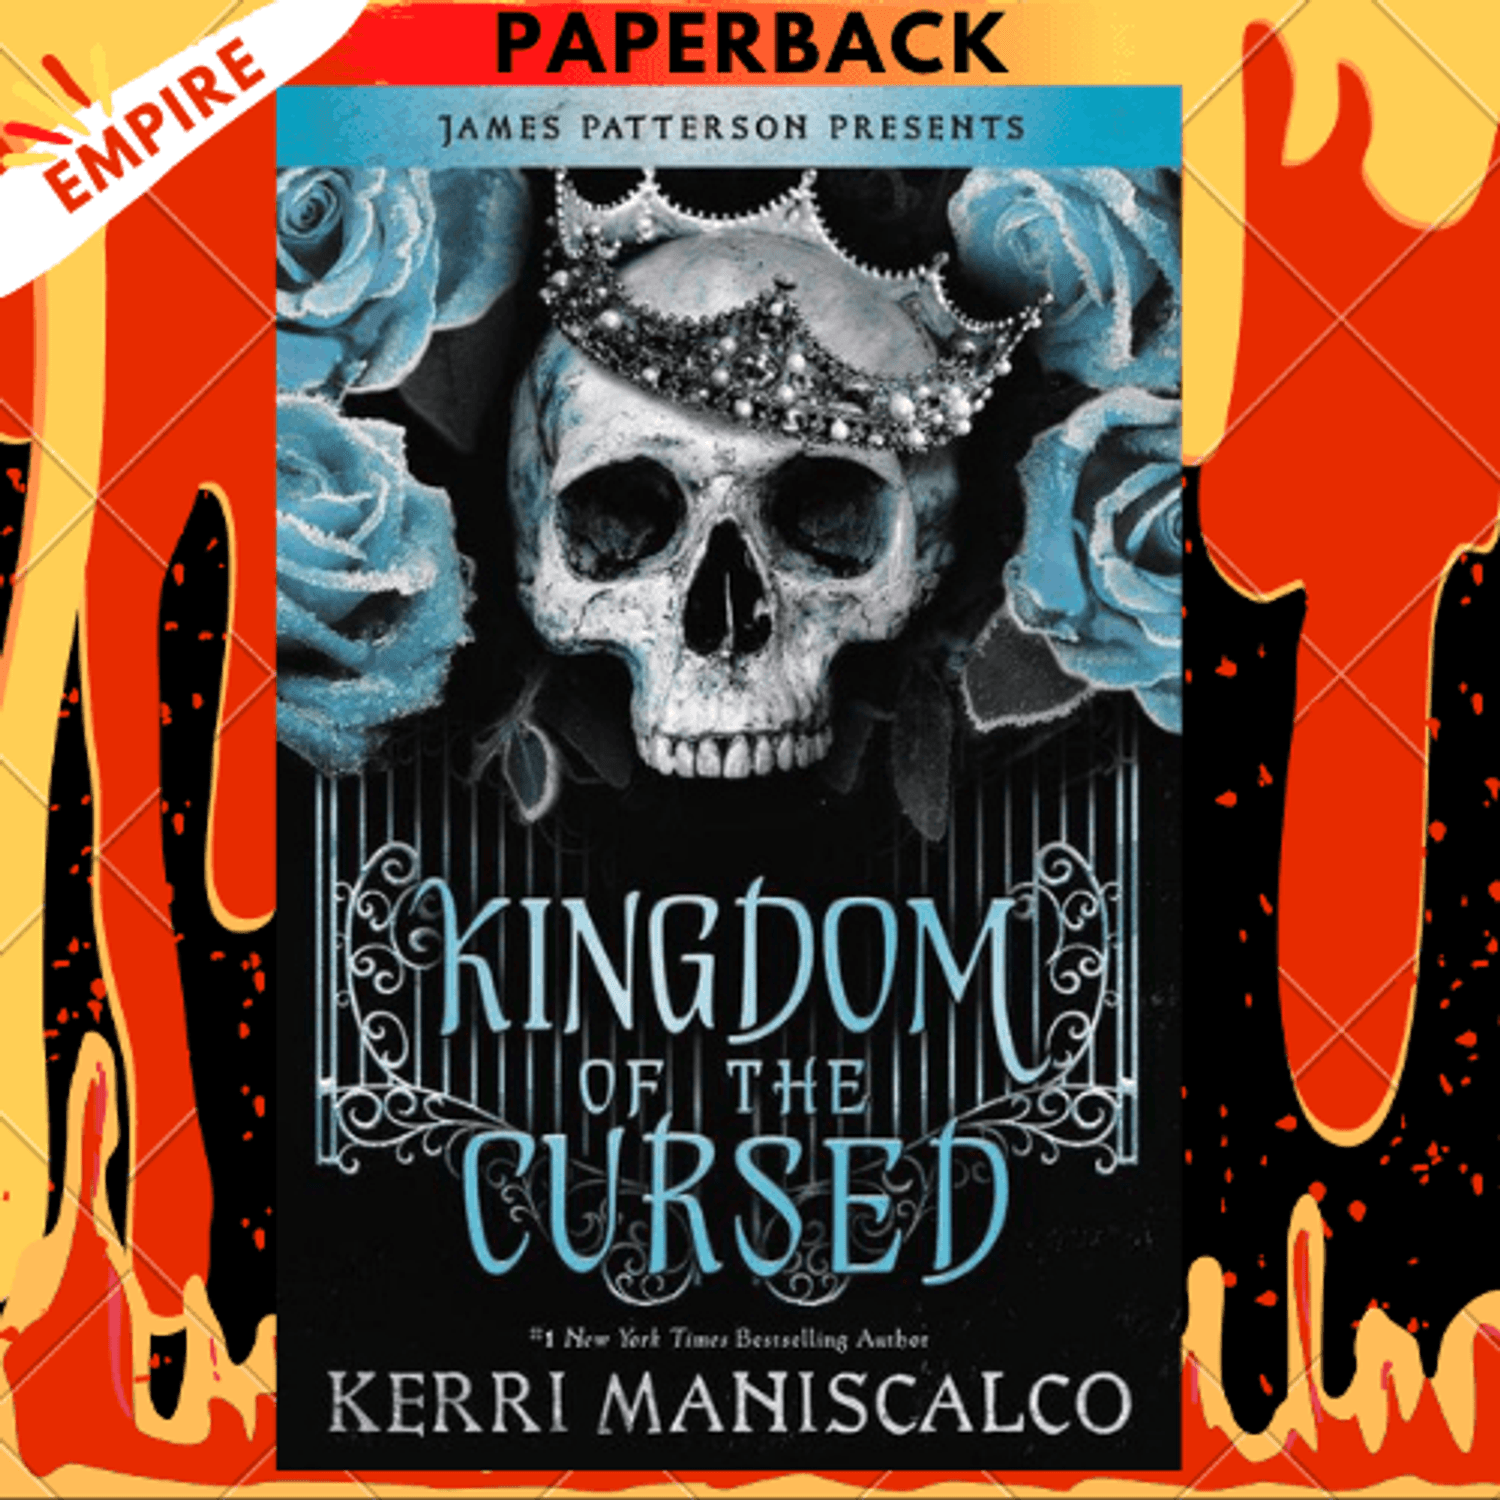 Kingdom of the Cursed (Kingdom of the Wicked Series #2) by Kerri Maniscalco